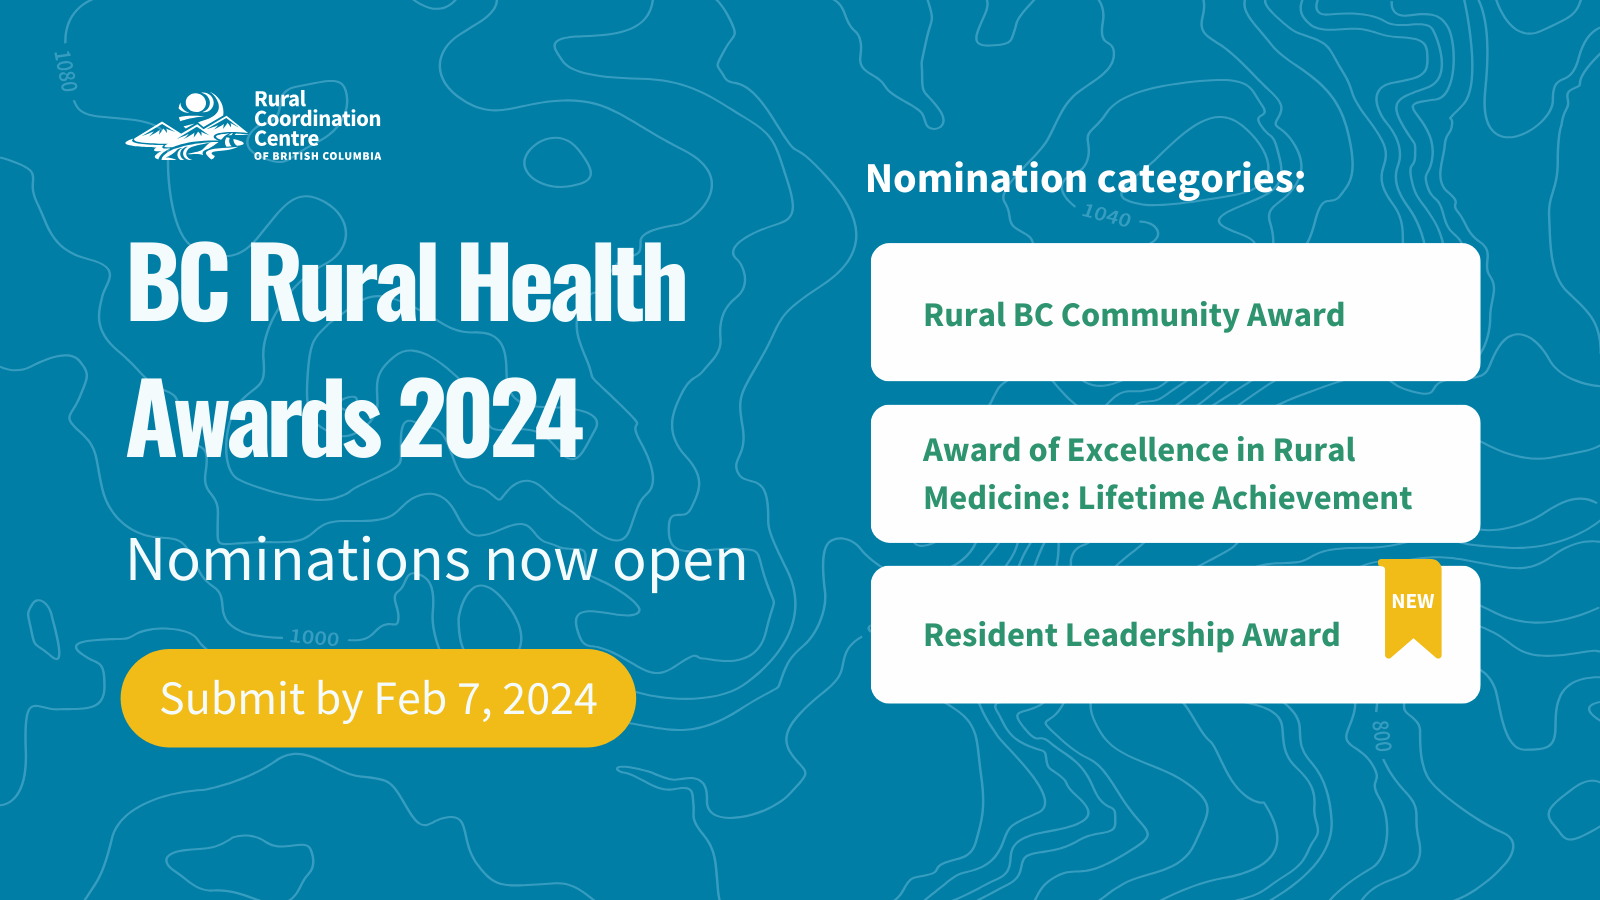 BC Rural Health Awards 2024 Nominations Now Open!